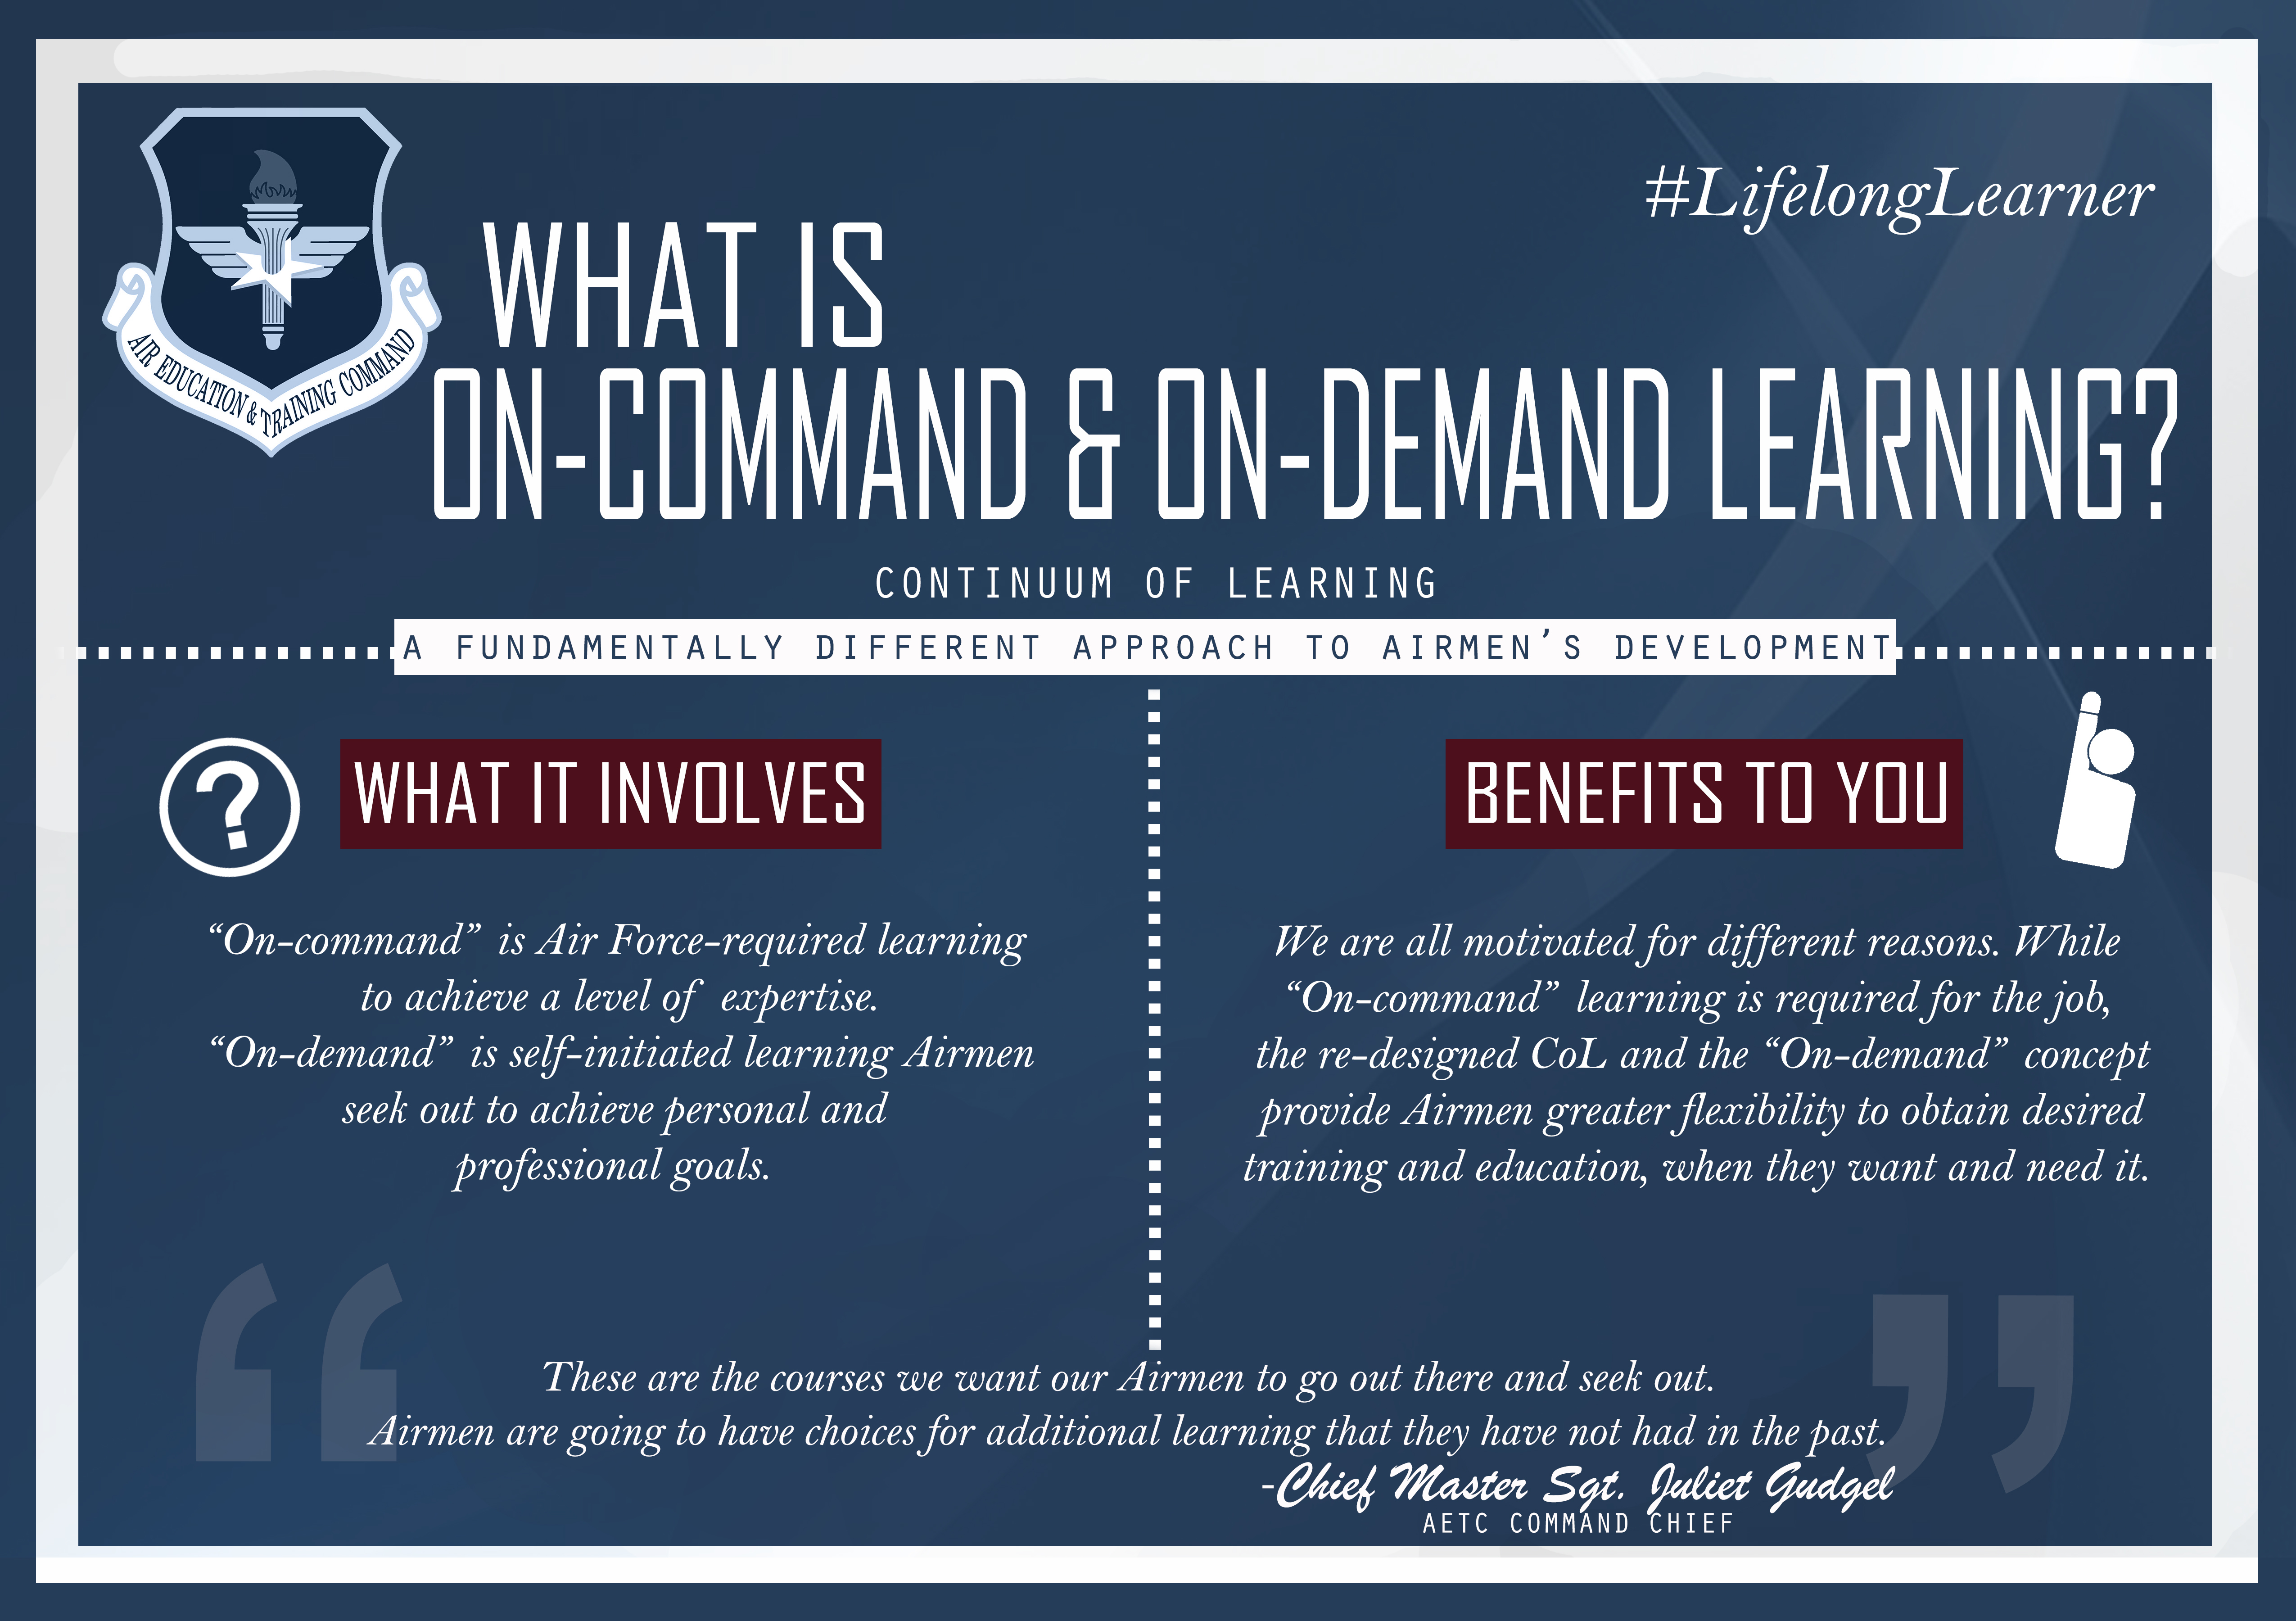 Continuum of Learning: On-Command and On-Demand